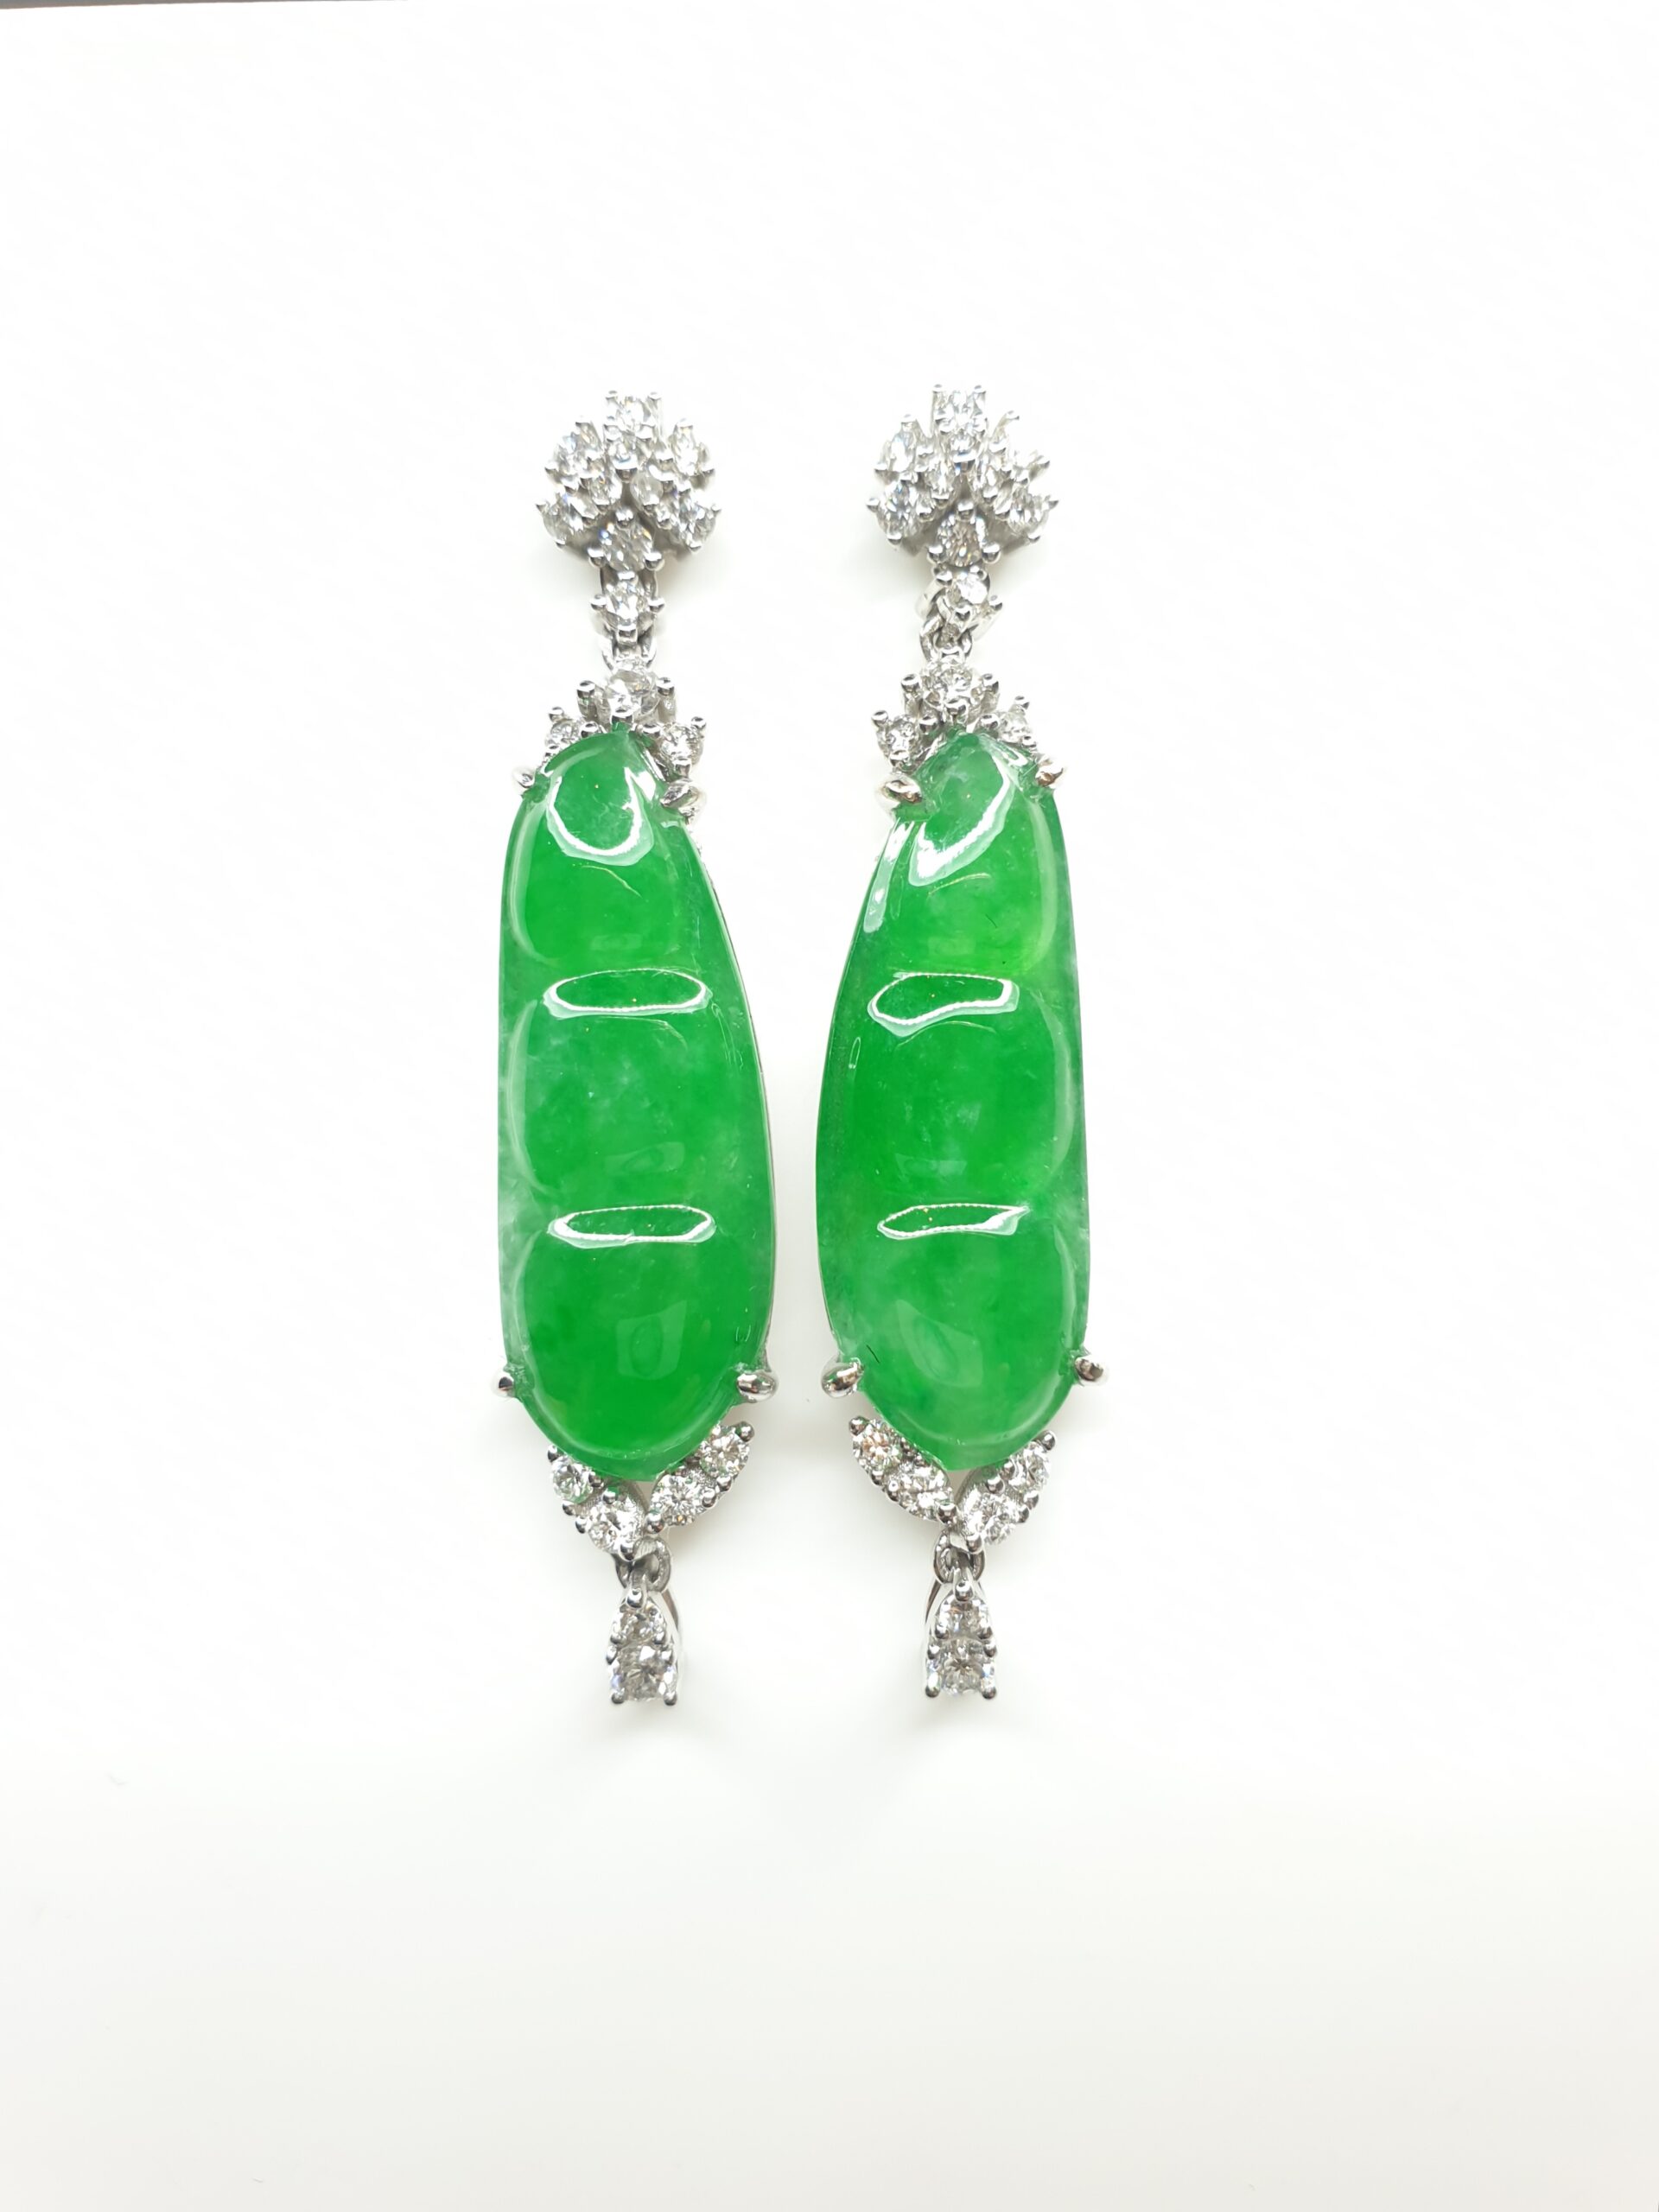 Buy Gold Plated Earrings With Dangling Green Jade Drop